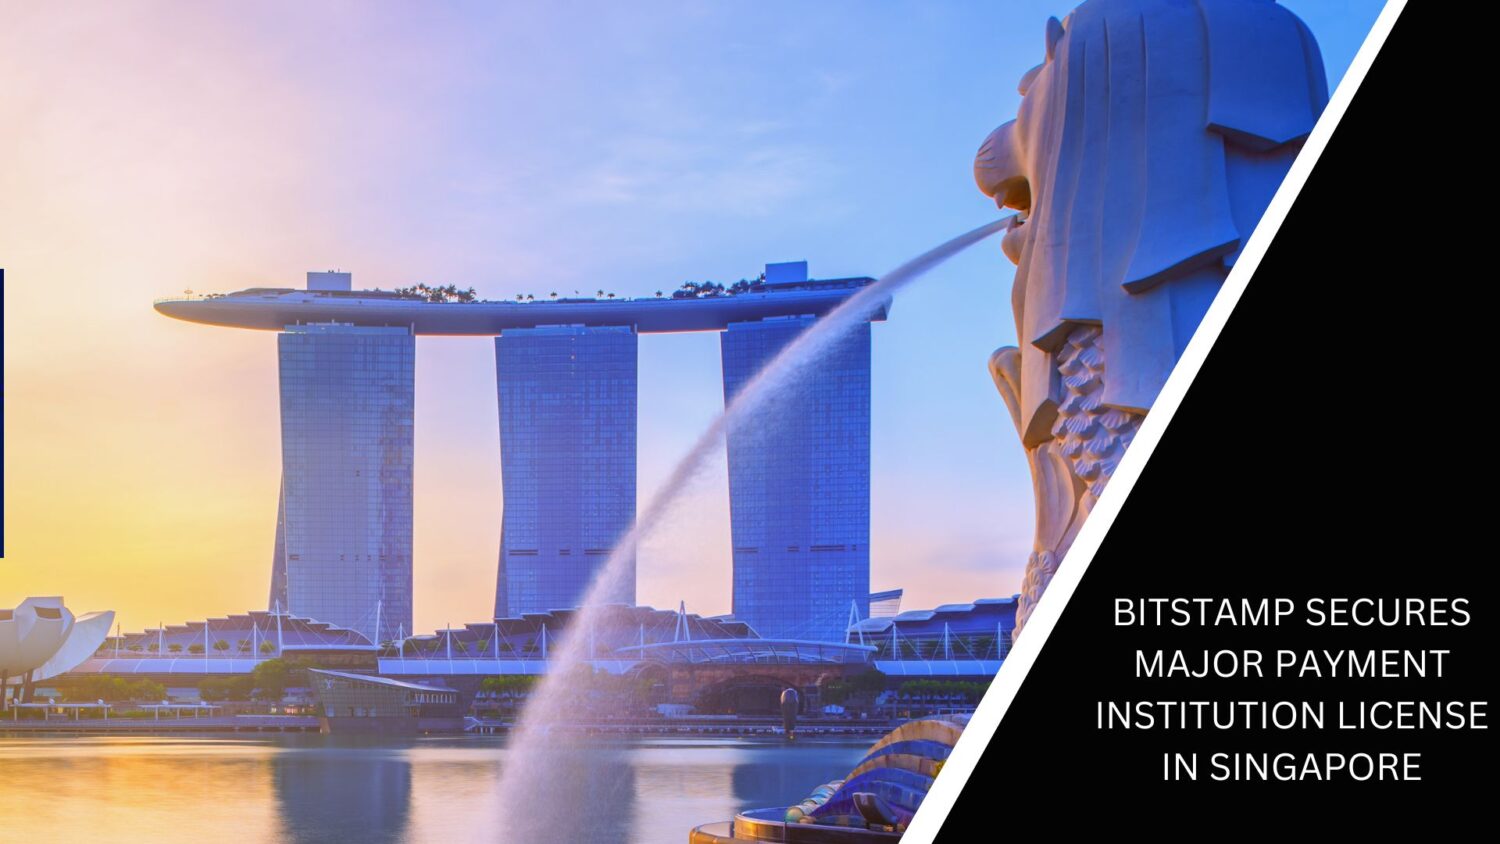 Bitstamp Secures Major Payment Institution License In Singapore